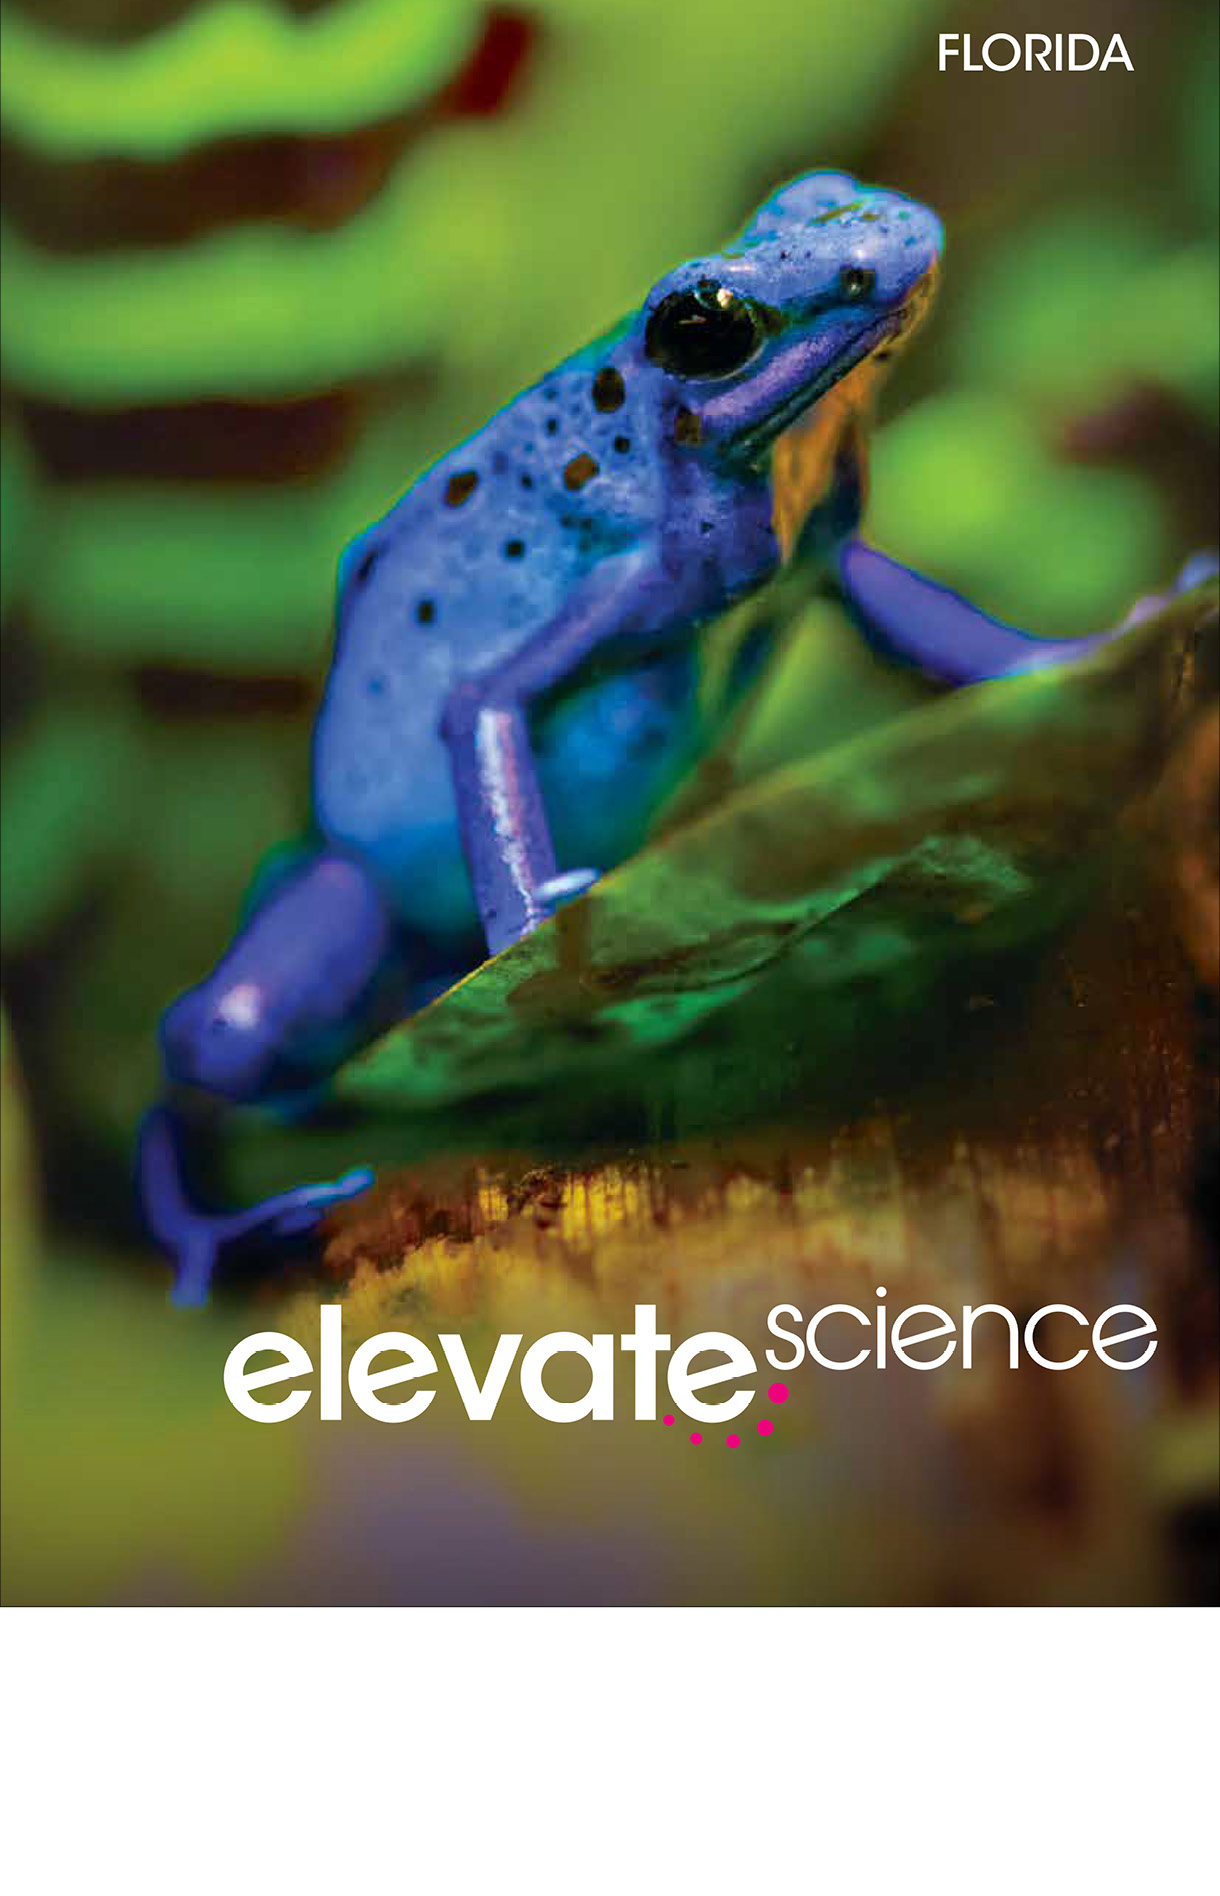 Book cover Elevate Science book. It has a blue poison dart frog sitting on a tree branch.